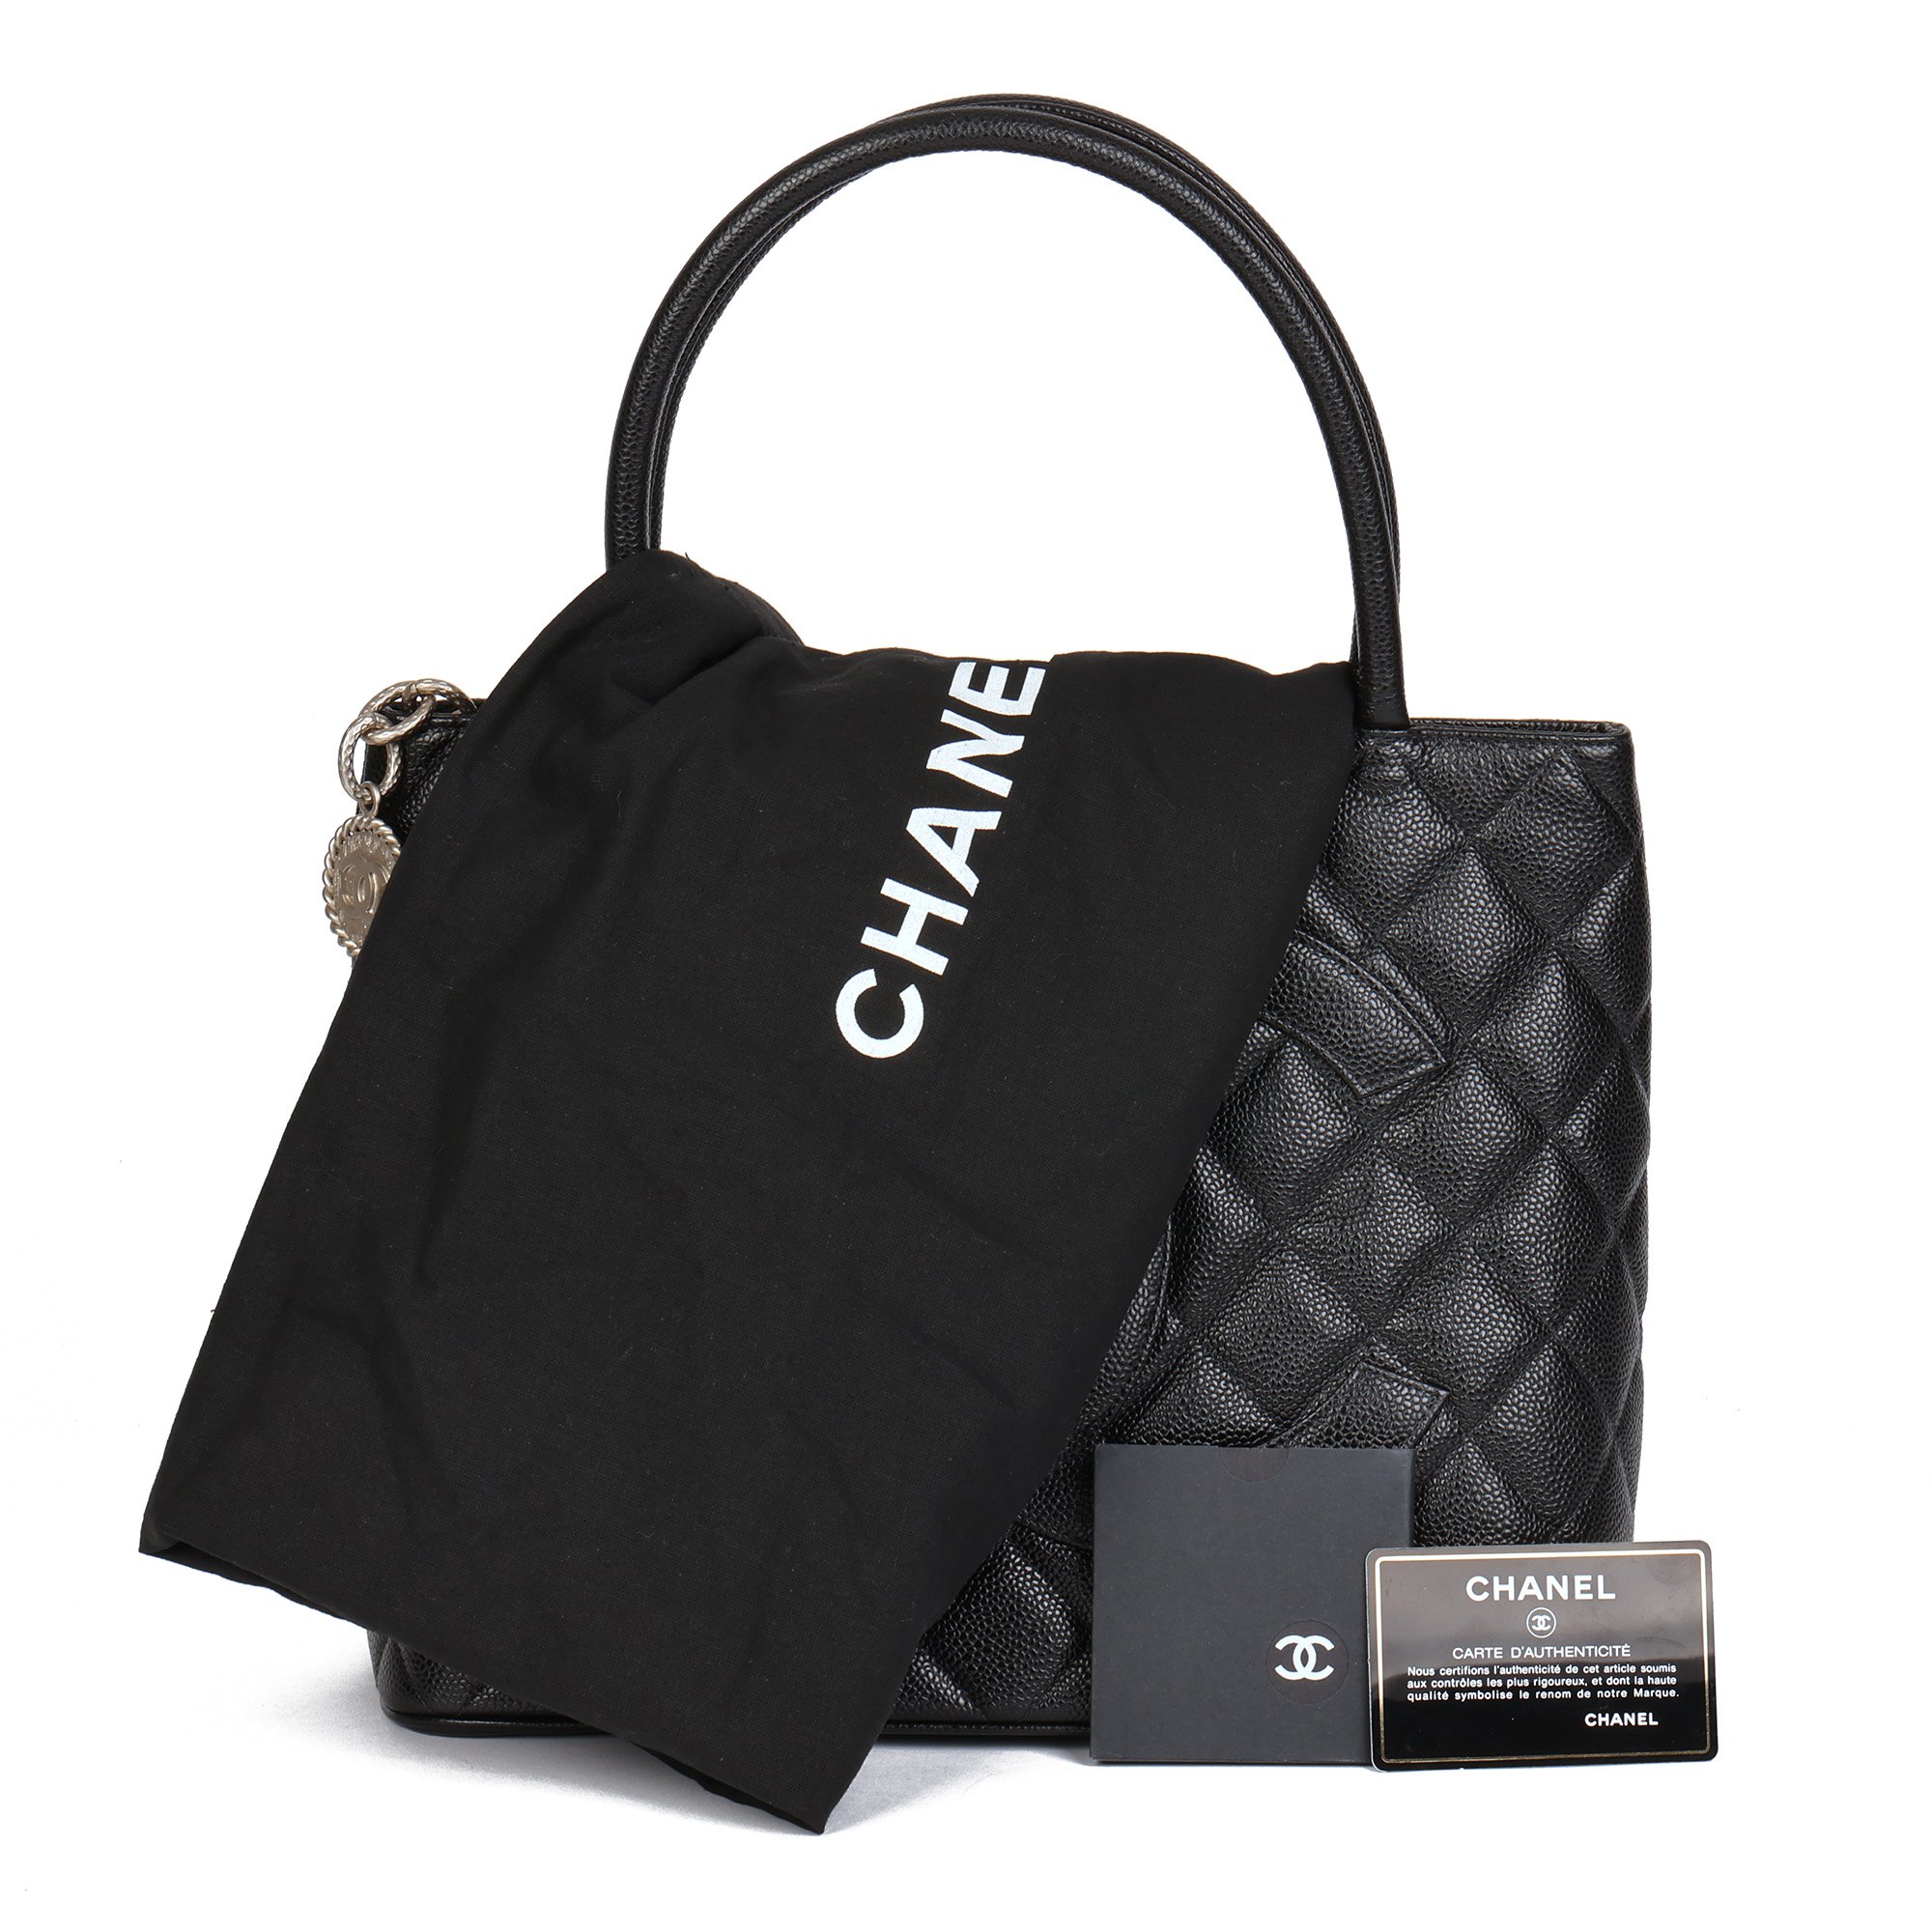 Chanel Black Quilted Caviar Leather Vintage Medallion Tote